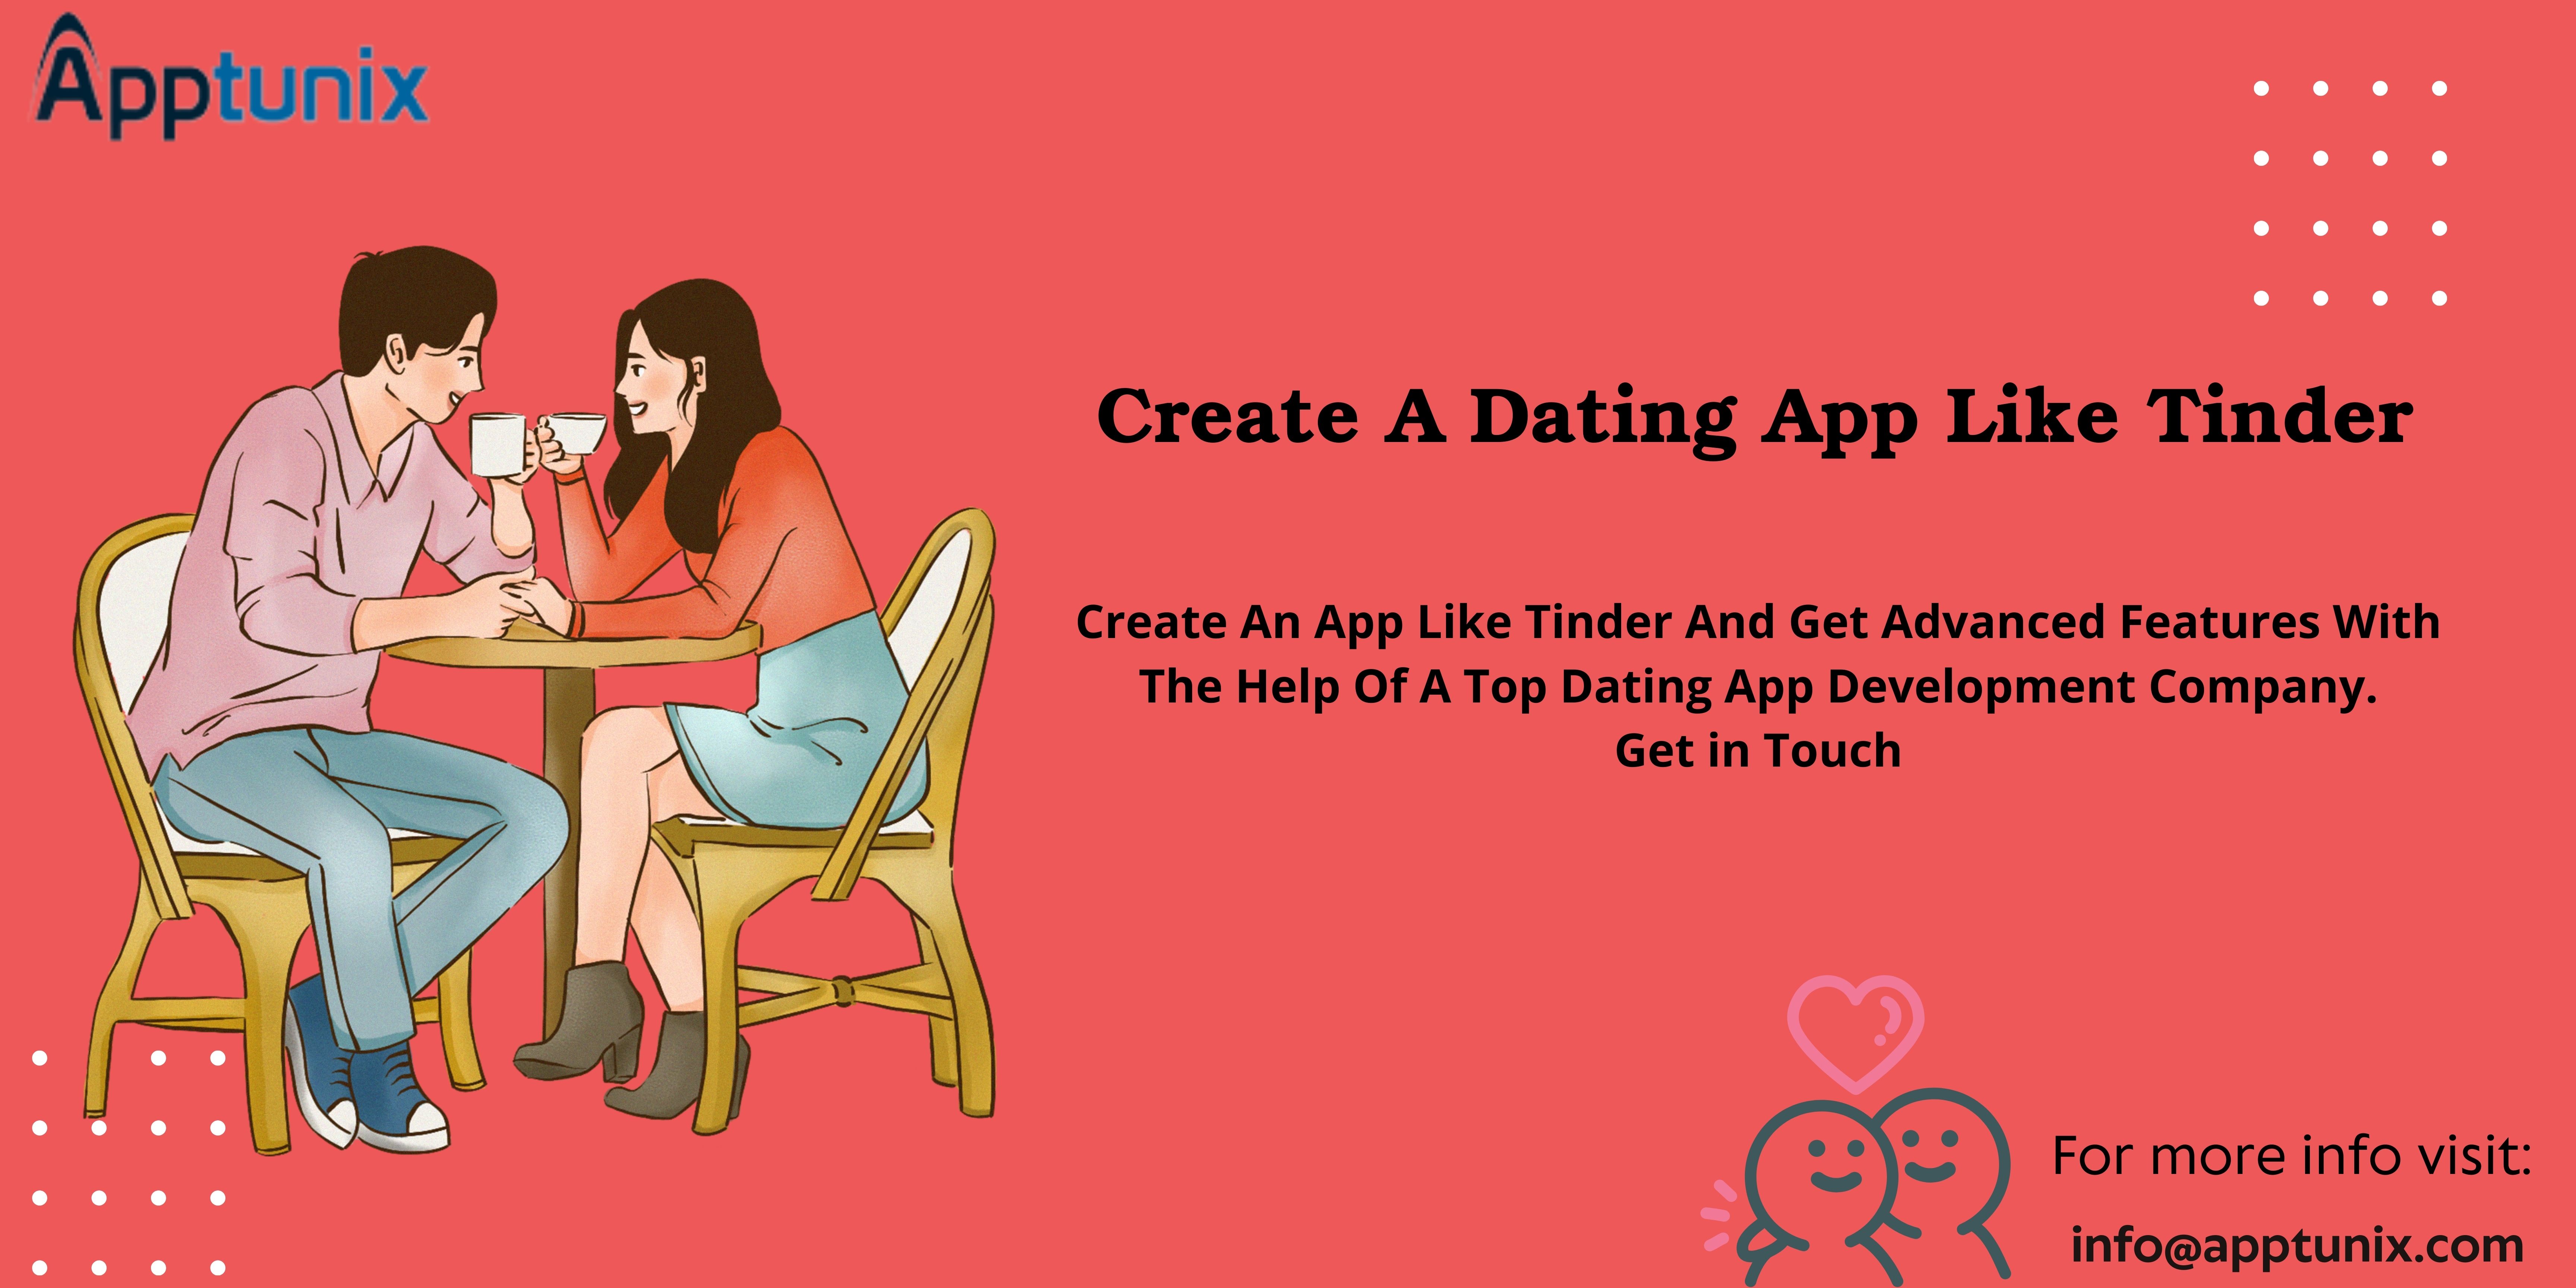 How to Create a Dating App Like Tinder: Cost and Features